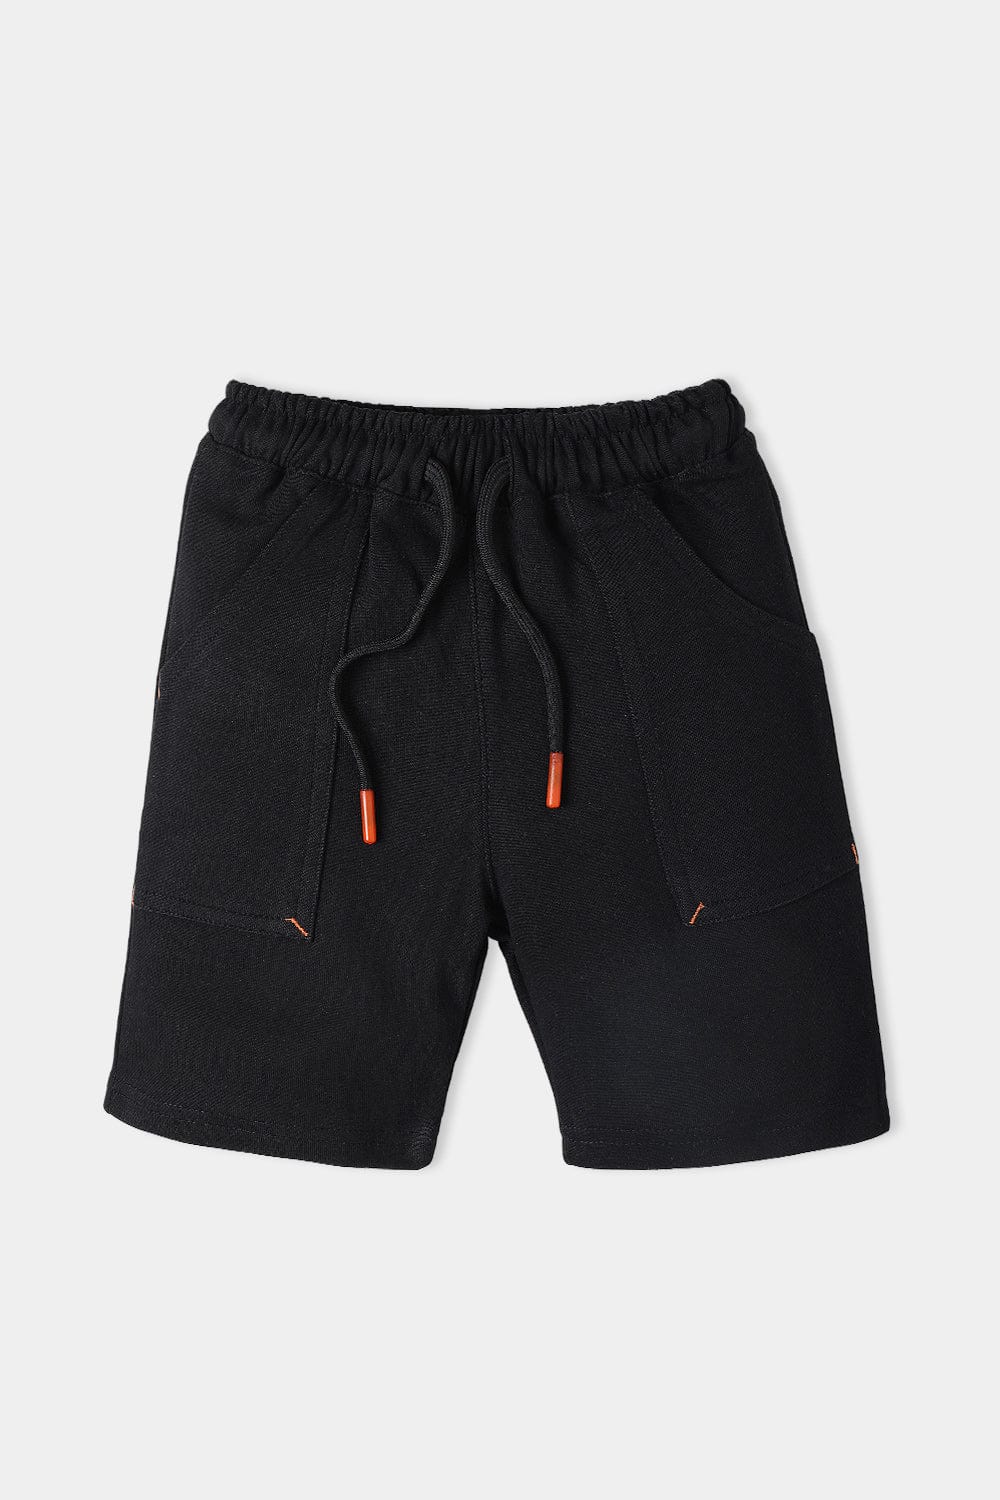 Hope Not Out by Shahid Afridi Boys Non Denim Shorts Black Knit Shorts for Boys